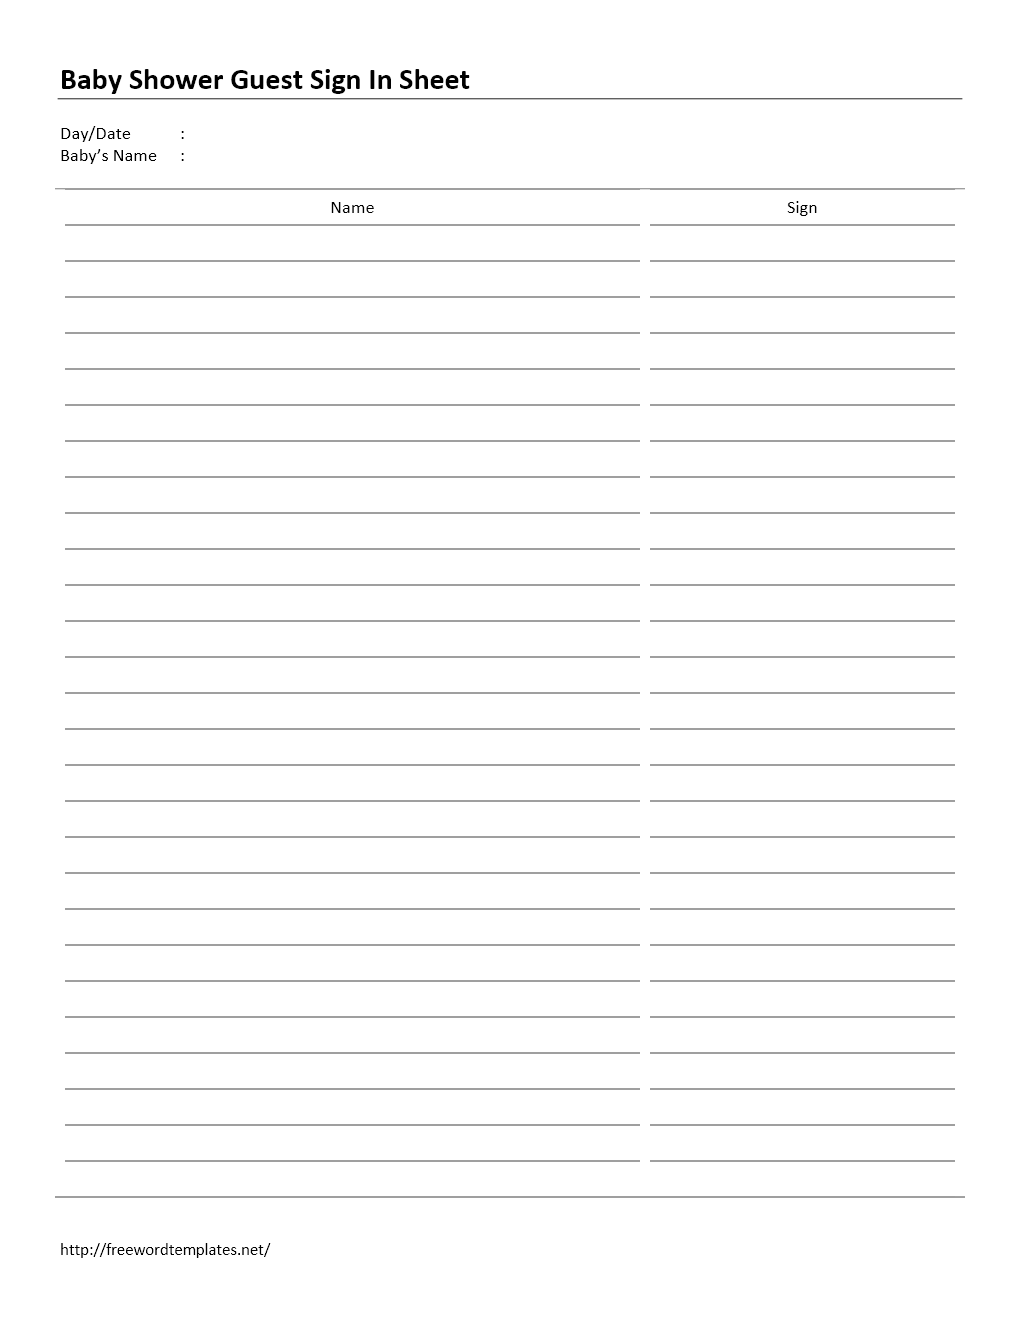 free-download-sign-in-sheet-templates-for-microsoft-word-programs-sintrust